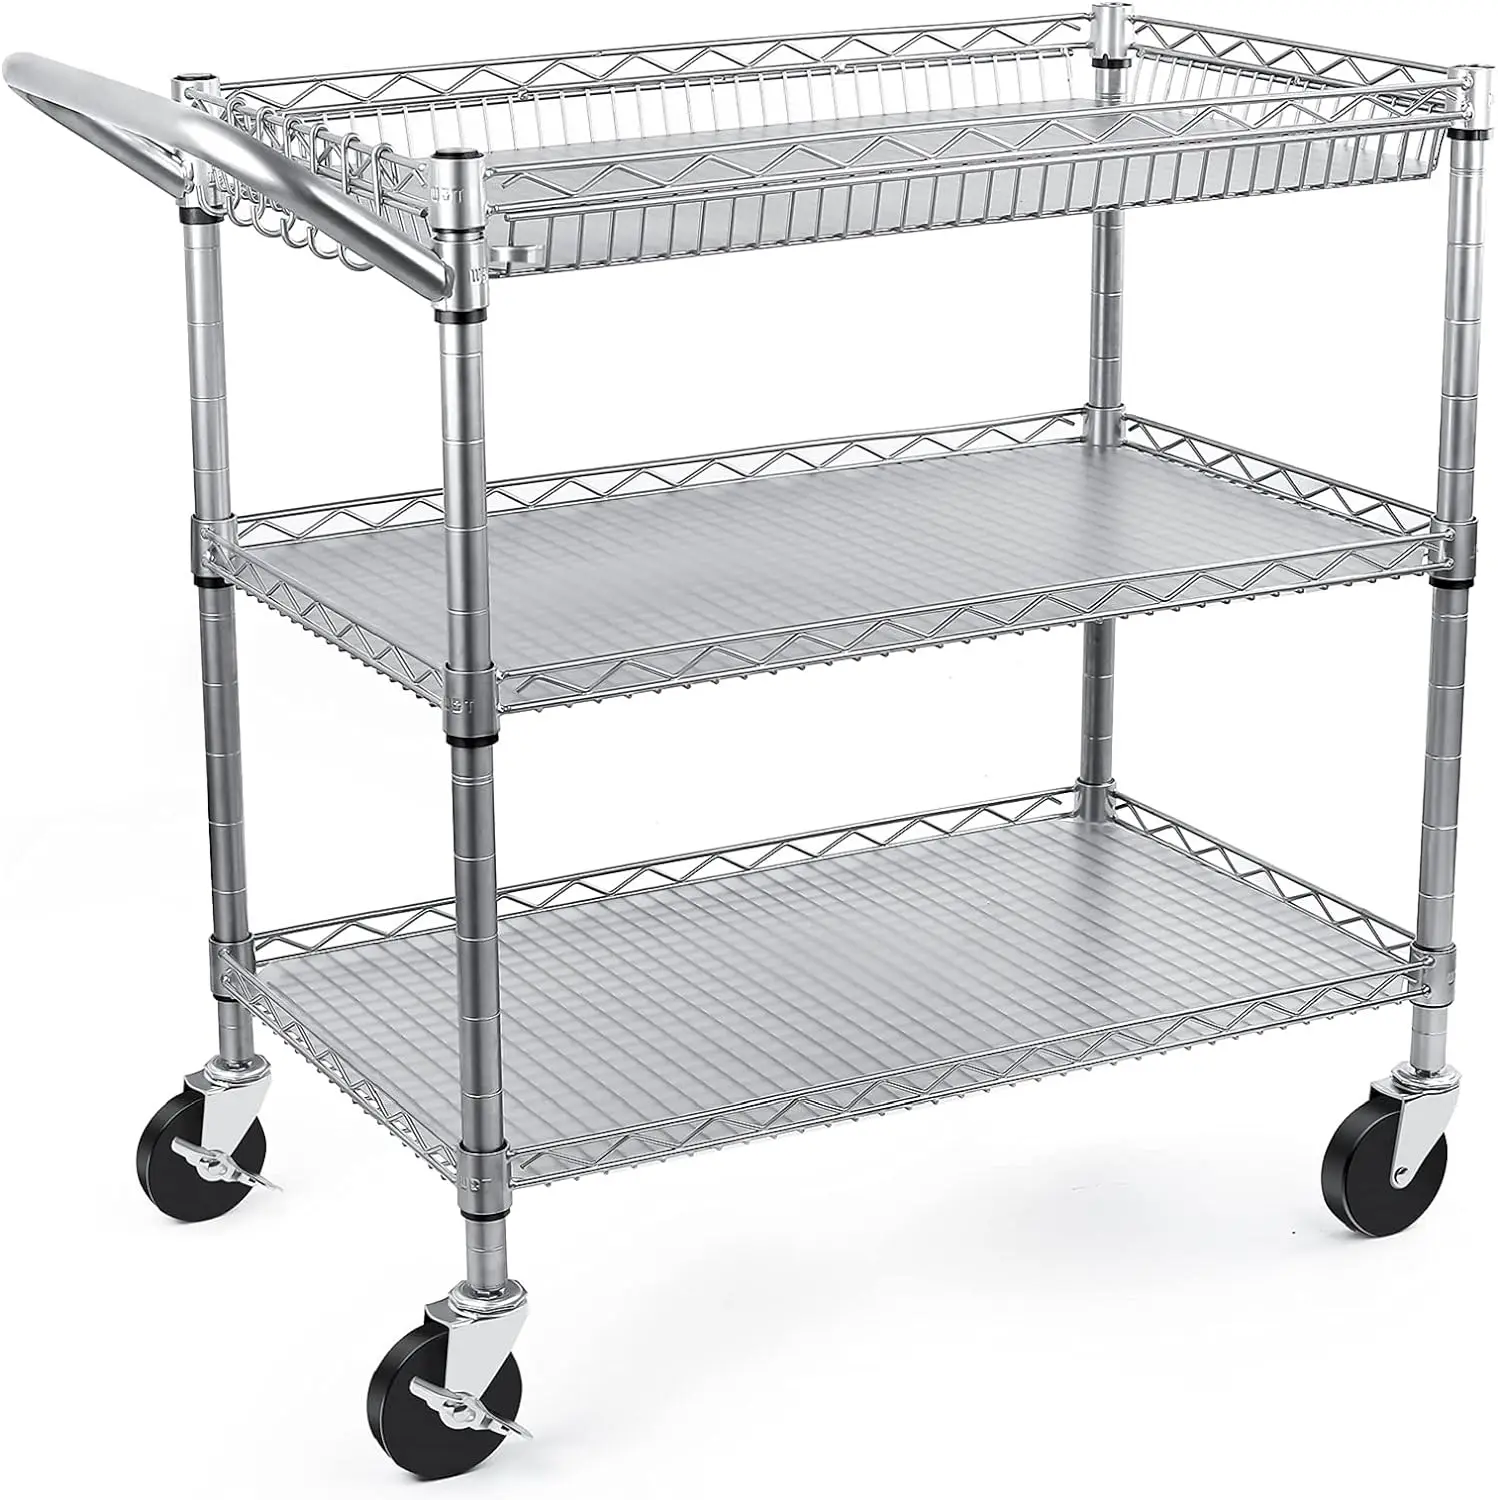 

Duty 3 Tier Rolling Utility Cart, Kitchen Cart on Wheels Metal Serving Cart Commercial Grade with Wire Shelving Liners and Handl